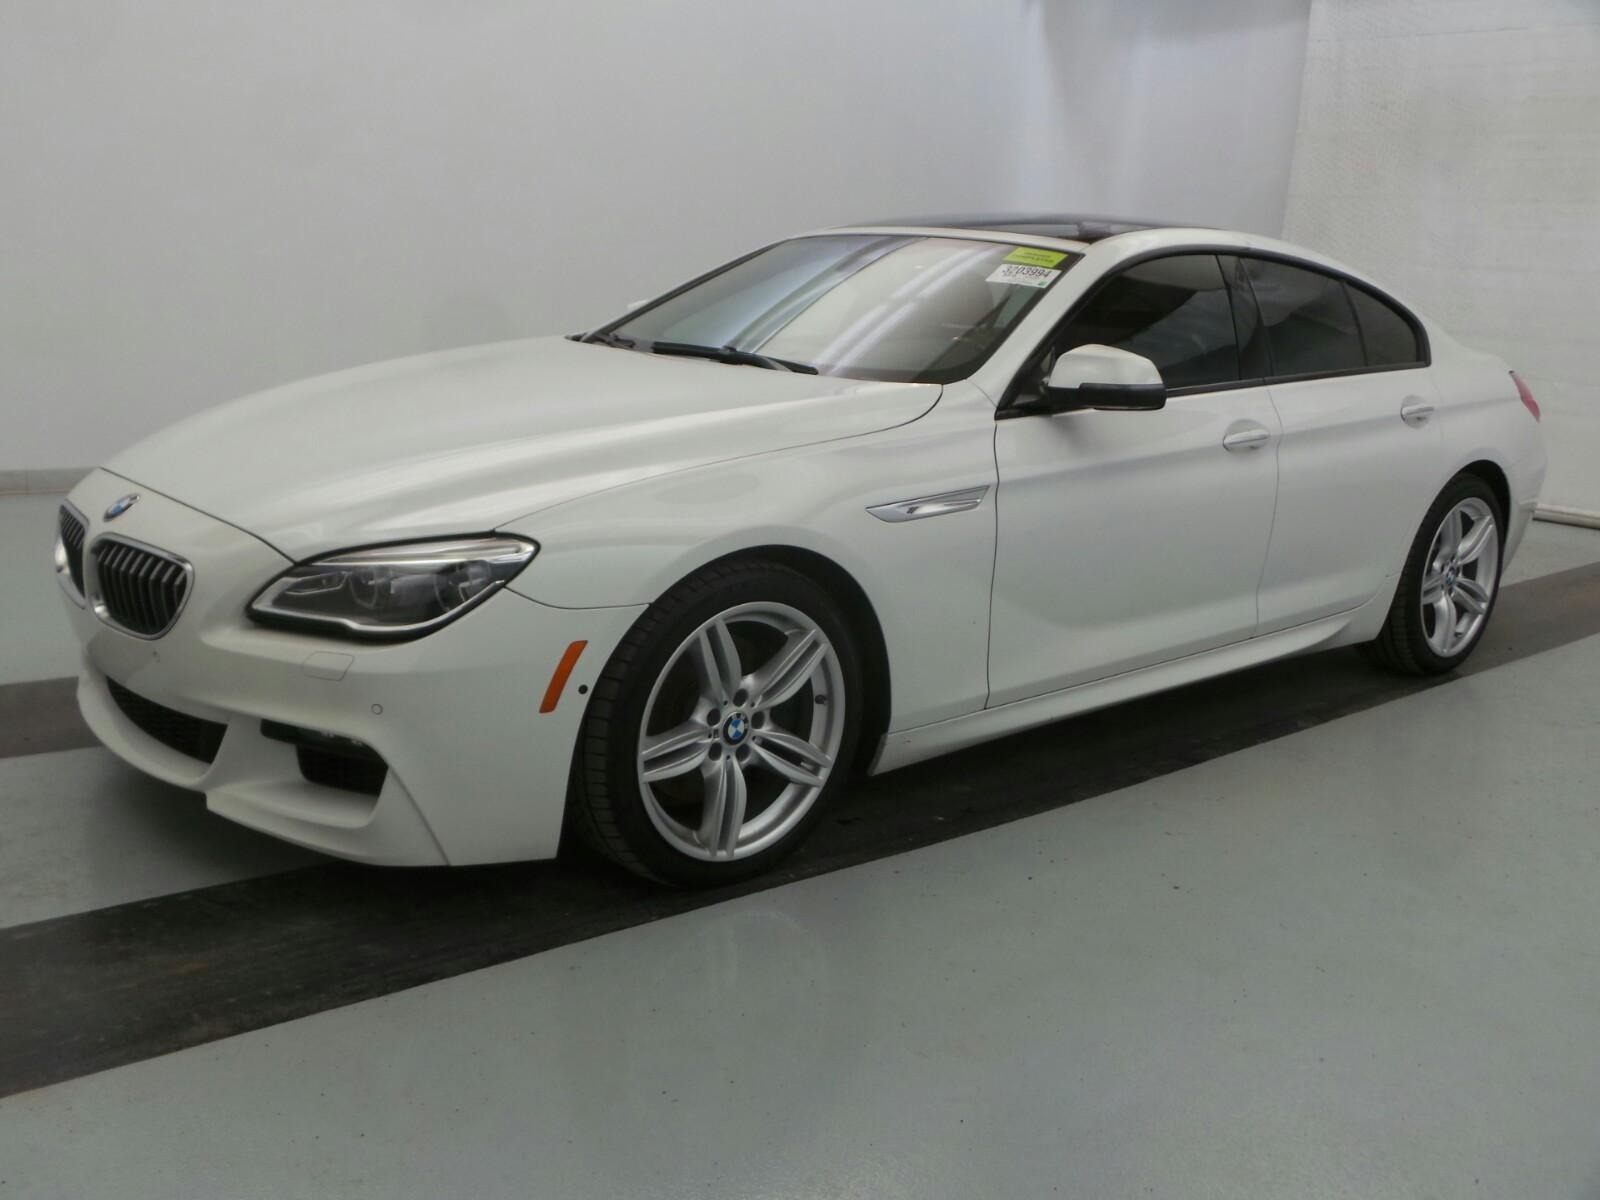 Used 2016 BMW 6 Series 650i xDrive Gran Coupe For Sale ($58,395) | Platinum  Motorcars Stock #16650I